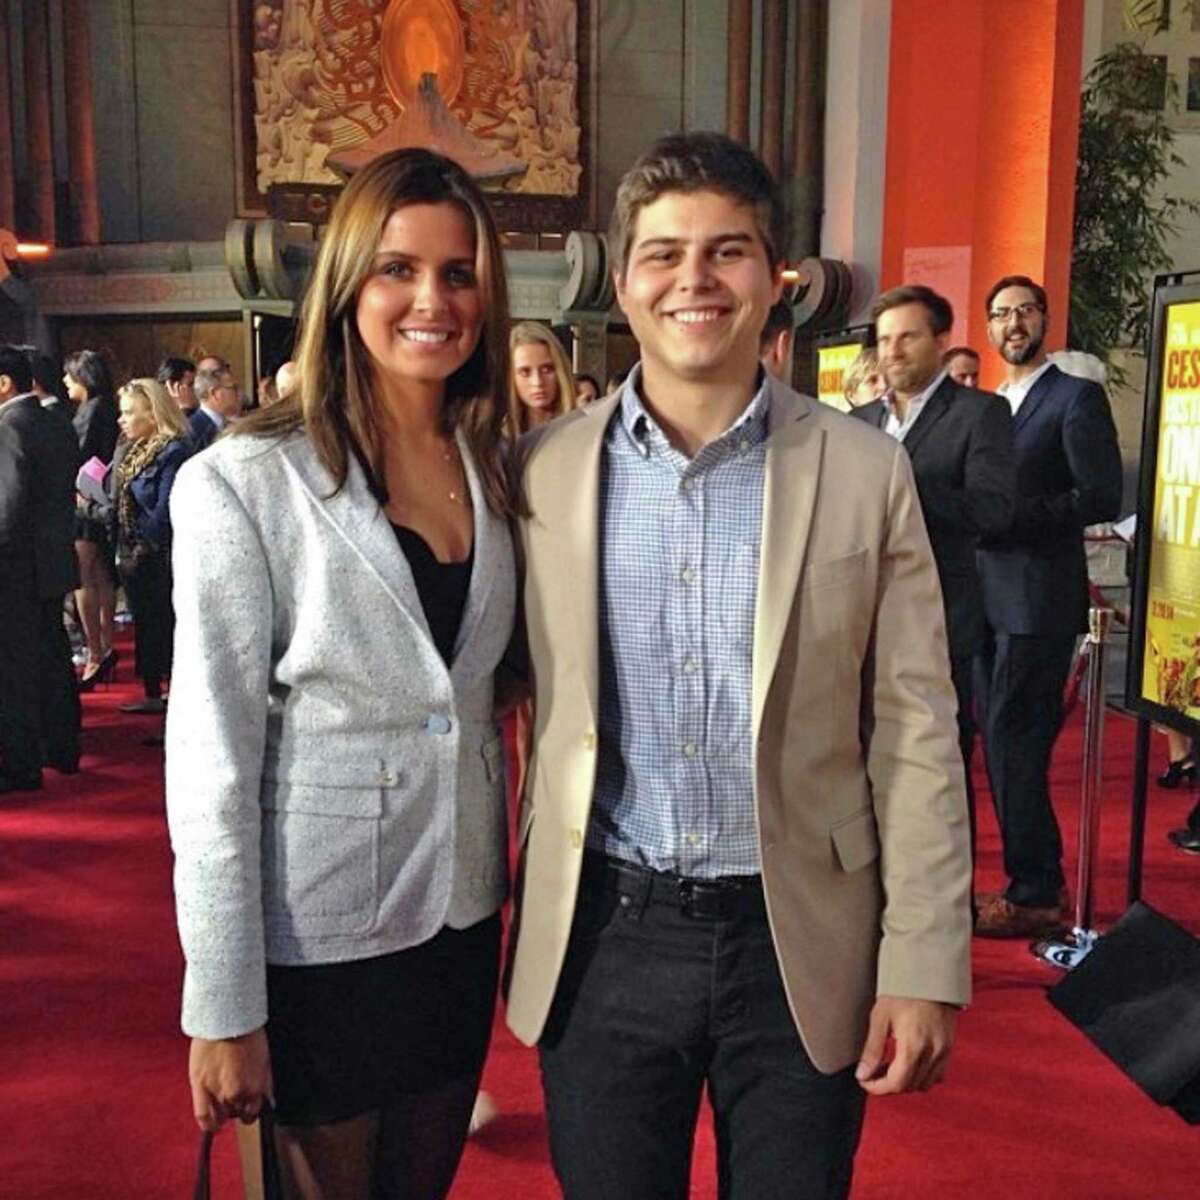 Olenka Polak and her brother Adam, who grew up in Riverside and founded successful app company myLingo.